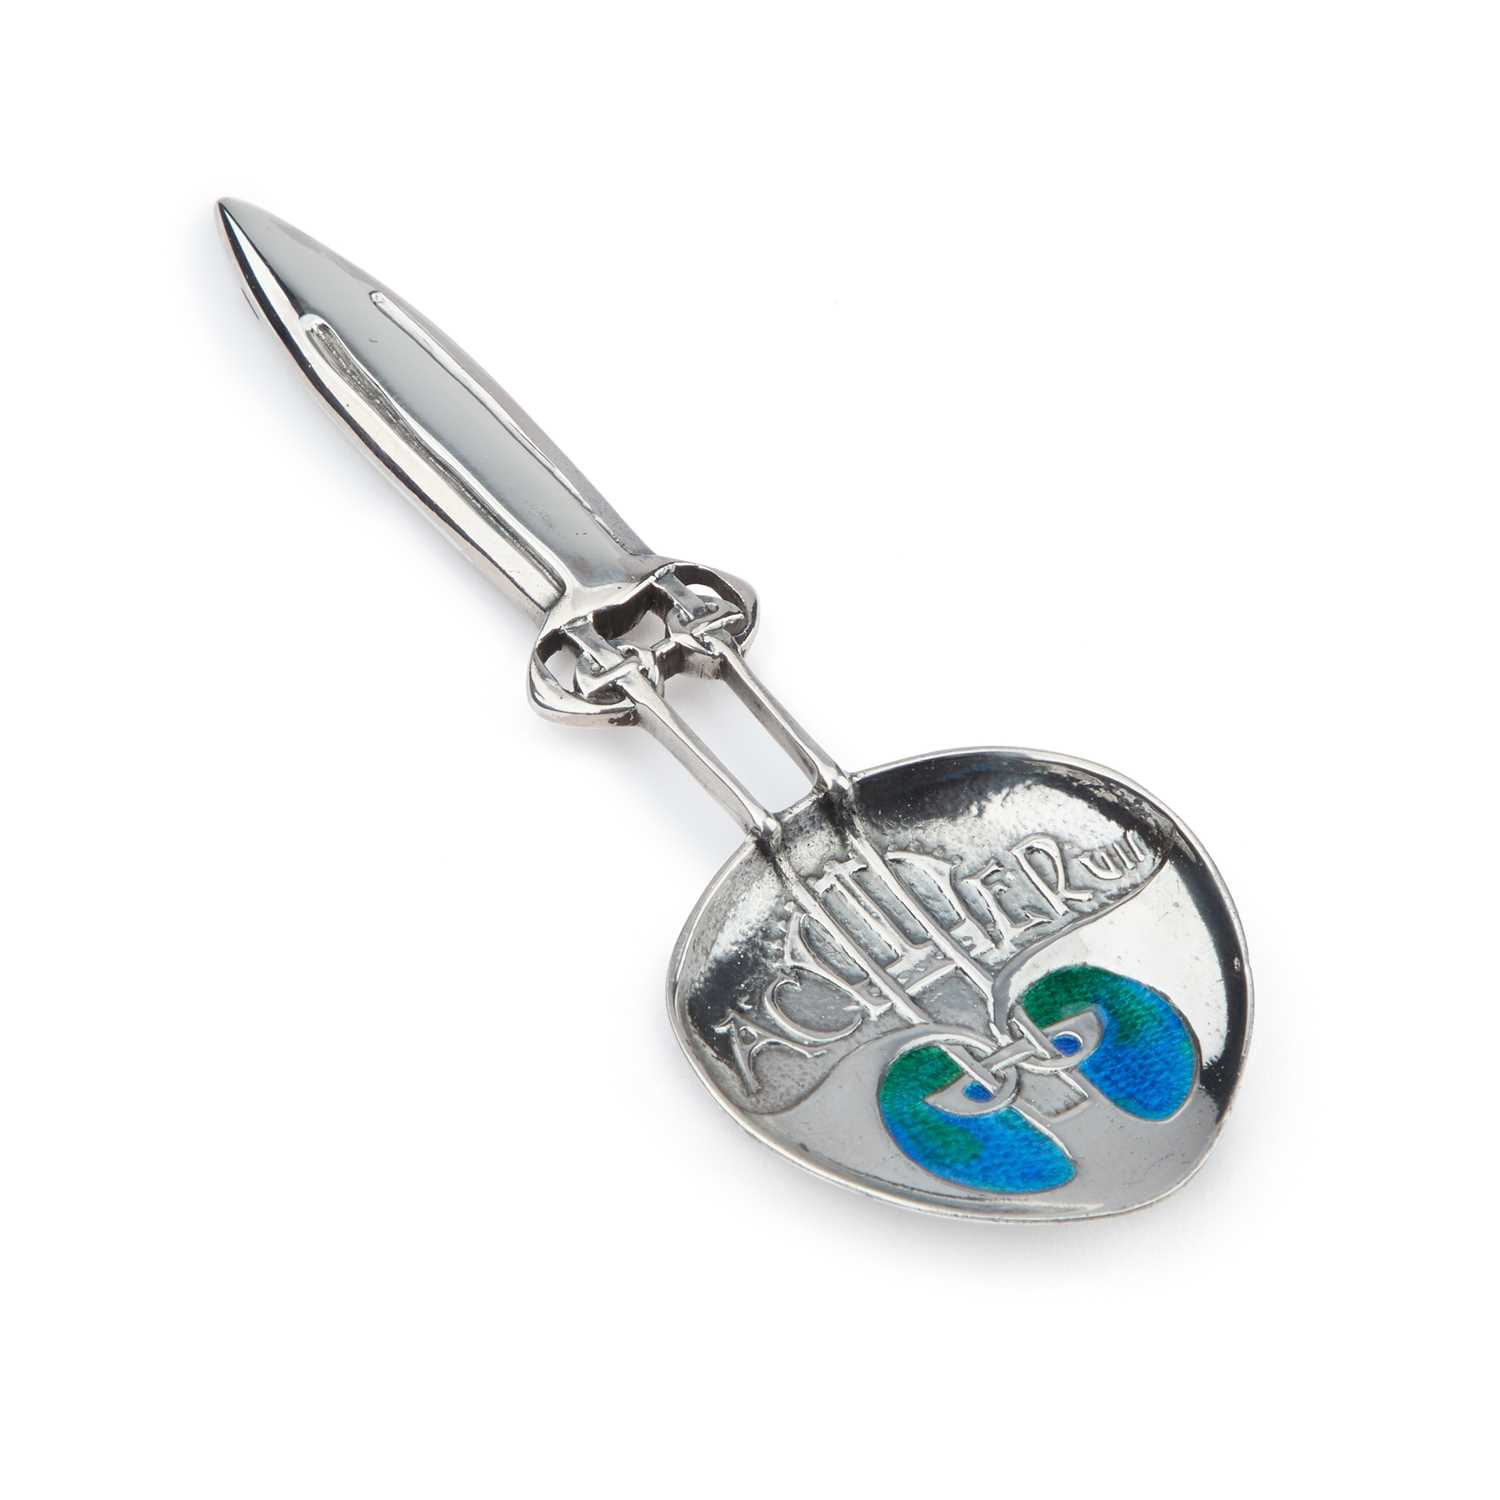 ARCHIBALD KNOX (1864-1933) FOR LIBERTY & CO, A CYMRIC SILVER AND ENAMEL CORONATION SPOON